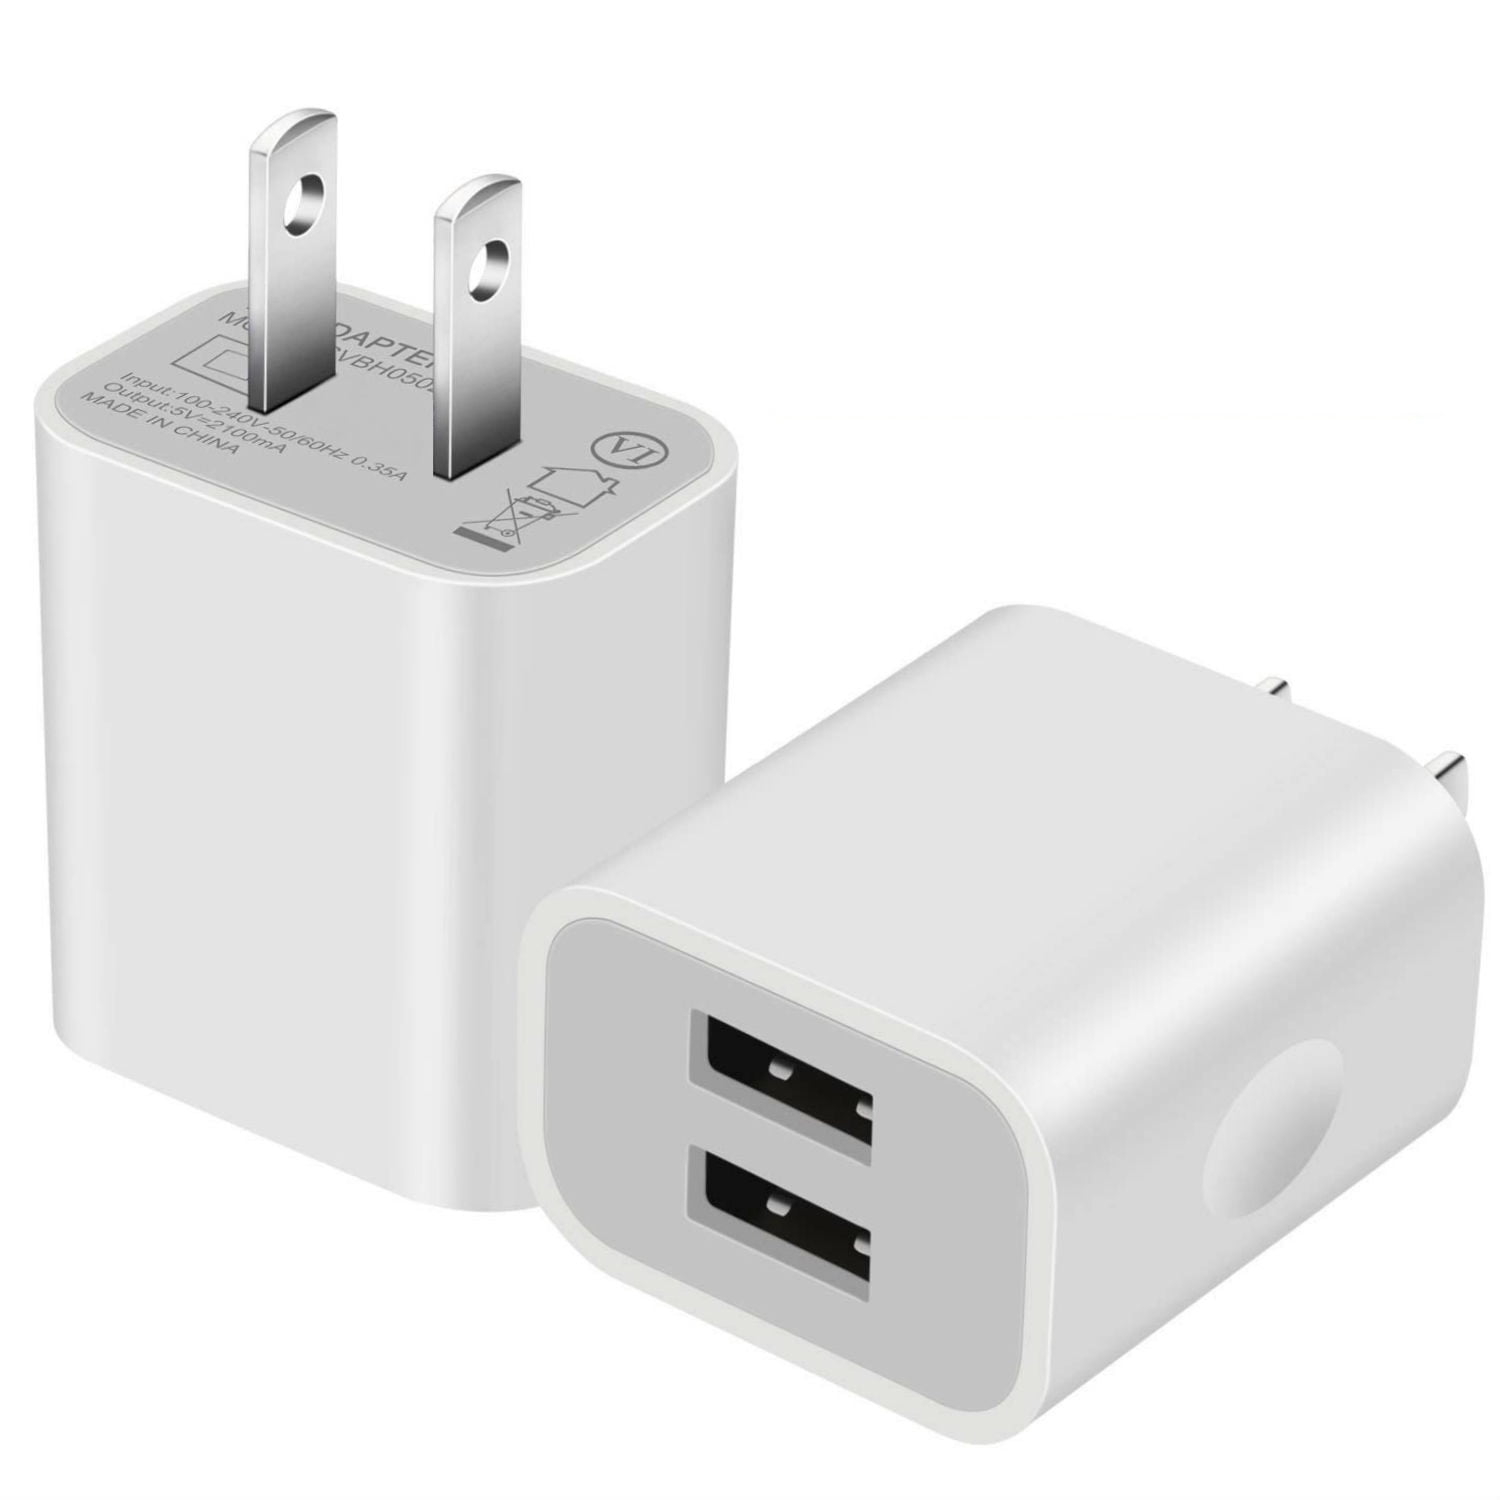 Halvkreds mixer kort USB Charger, 4-Pack Certified 2.1A 2-Port USB Wall Charger Portable Travel  Power Adapter for Apple iPhone X 8/7/6 Plus SE/5S/4S,iPad, iPod,Samsung  Galaxy S7 S6, HTC, LG, Table, Motorola and More - Walmart.com